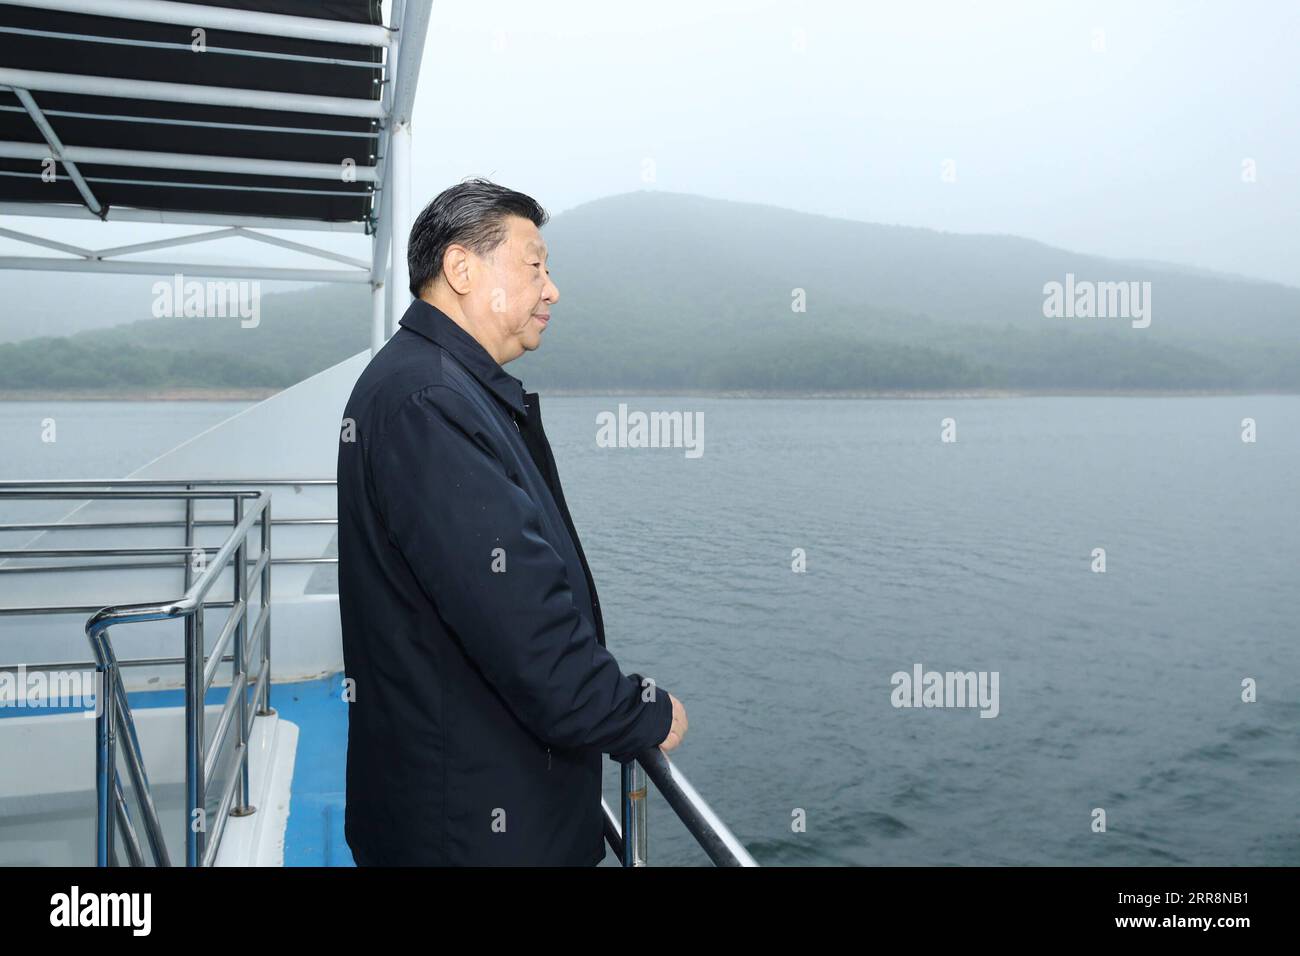 210513 -- NANYANG, May 13, 2021 -- Chinese President Xi Jinping, also general secretary of the Communist Party of China Central Committee and chairman of the Central Military Commission, inspects the Danjiangkou Reservoir and listens to introductions to the construction, management and operation of the middle route of the South-to-North Water Diversion Project, and the ecological conservation of the water source region in Xichuan County, Nanyang, central China s Henan Province, May 13, 2021.  CHINA-HENAN-NANYANG-XI JINPING-INSPECTION CN JuxPeng PUBLICATIONxNOTxINxCHN Stock Photo